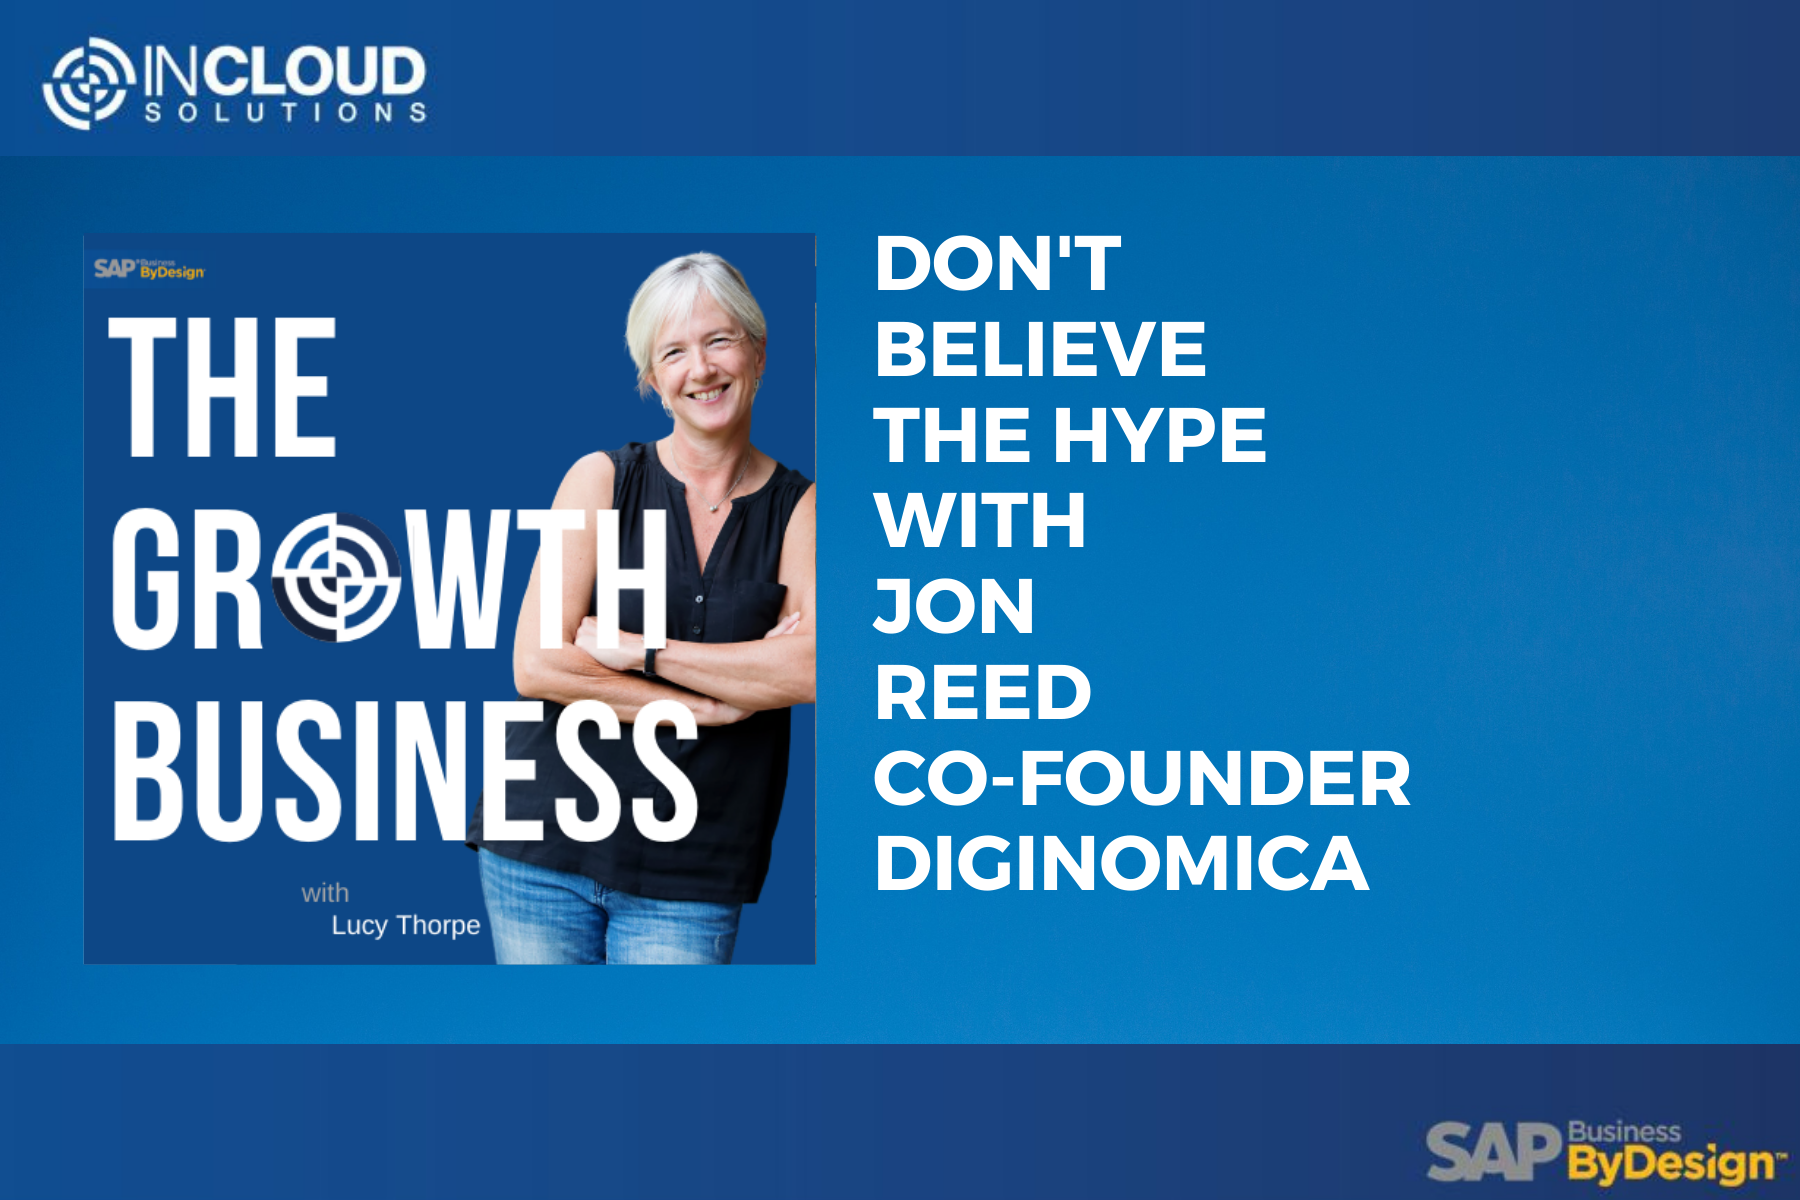 Don't believe the hype - Jon Reed - Diginomica